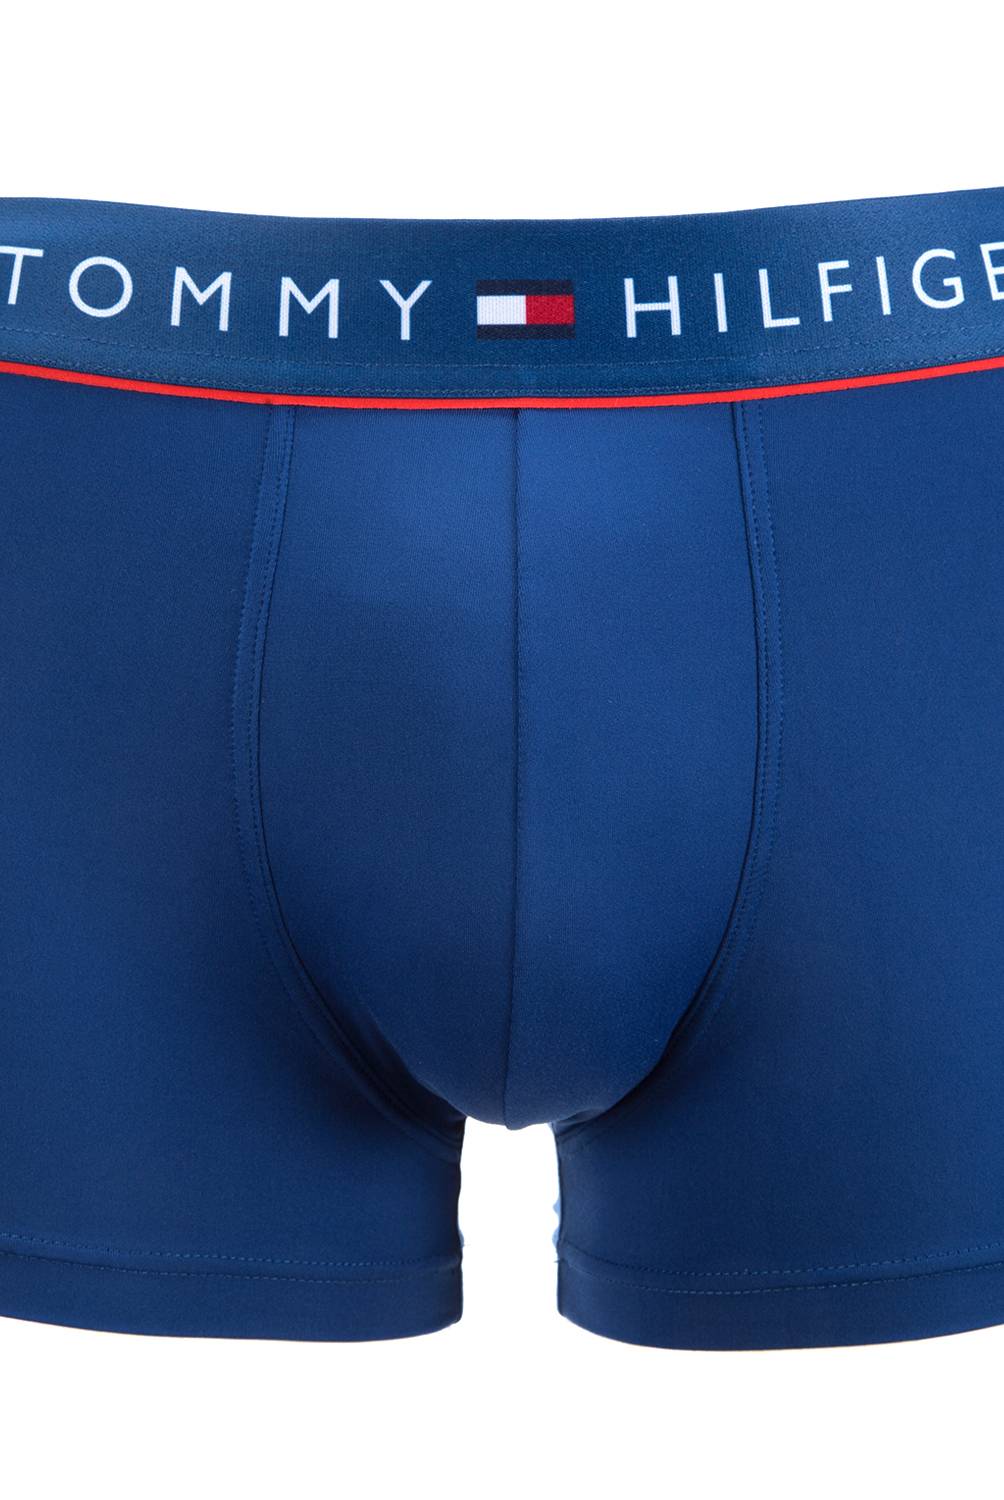 TOMMY HILFIGER - Boxers